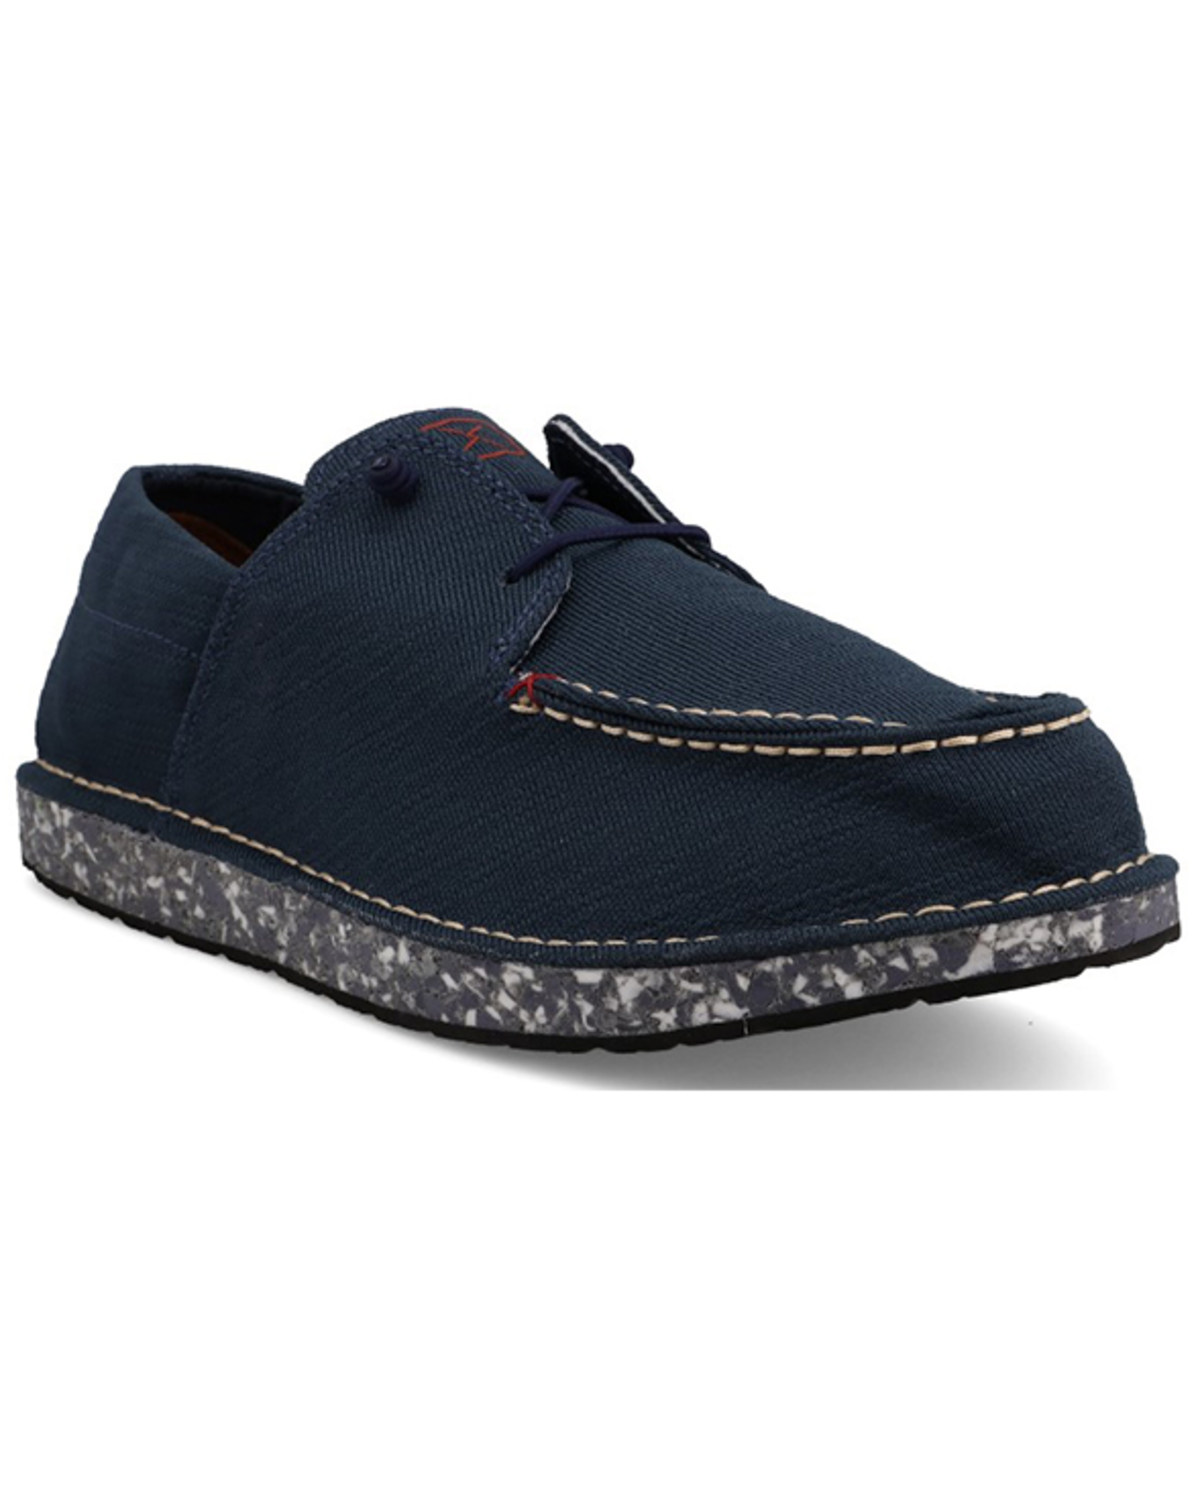 Twisted X Men's Circular Project™ Boat Shoes - Moc Toe